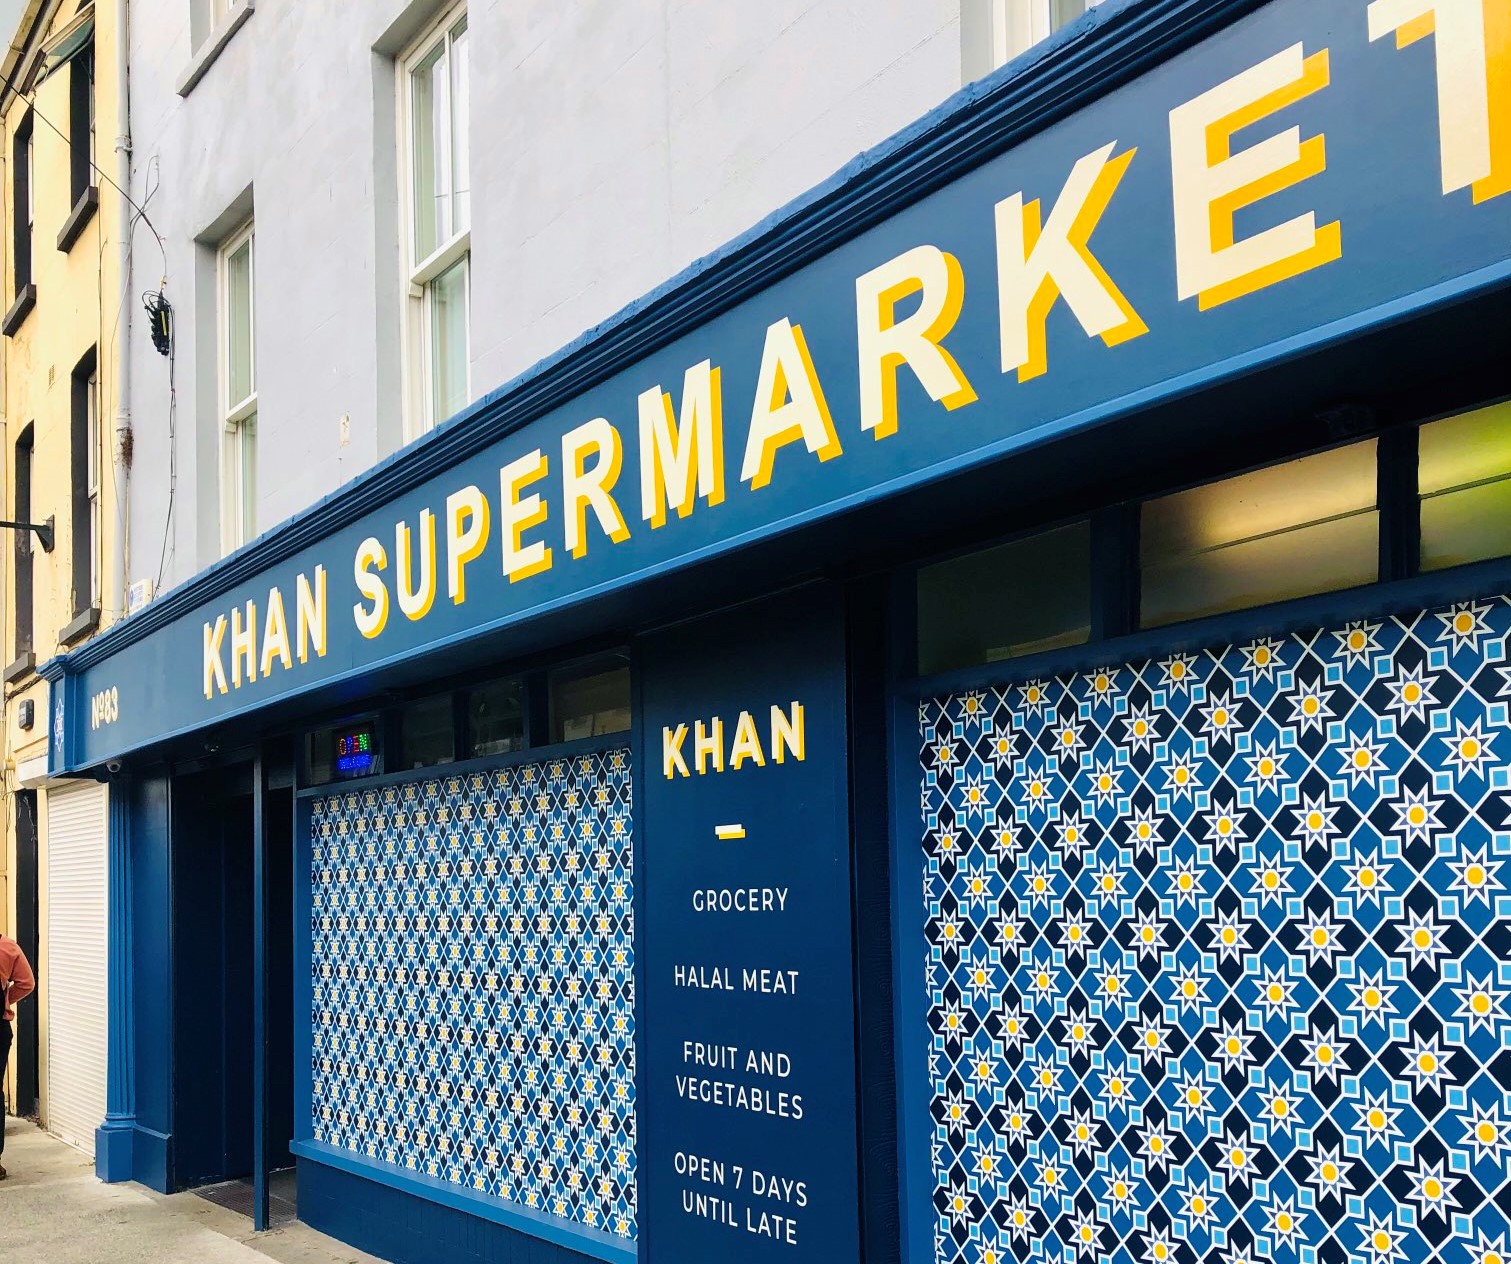 Khan Supermarket receives a remarkable makeover by the outstanding decorating company J. Hodkinson and Sons. Picture: Deirdre Power